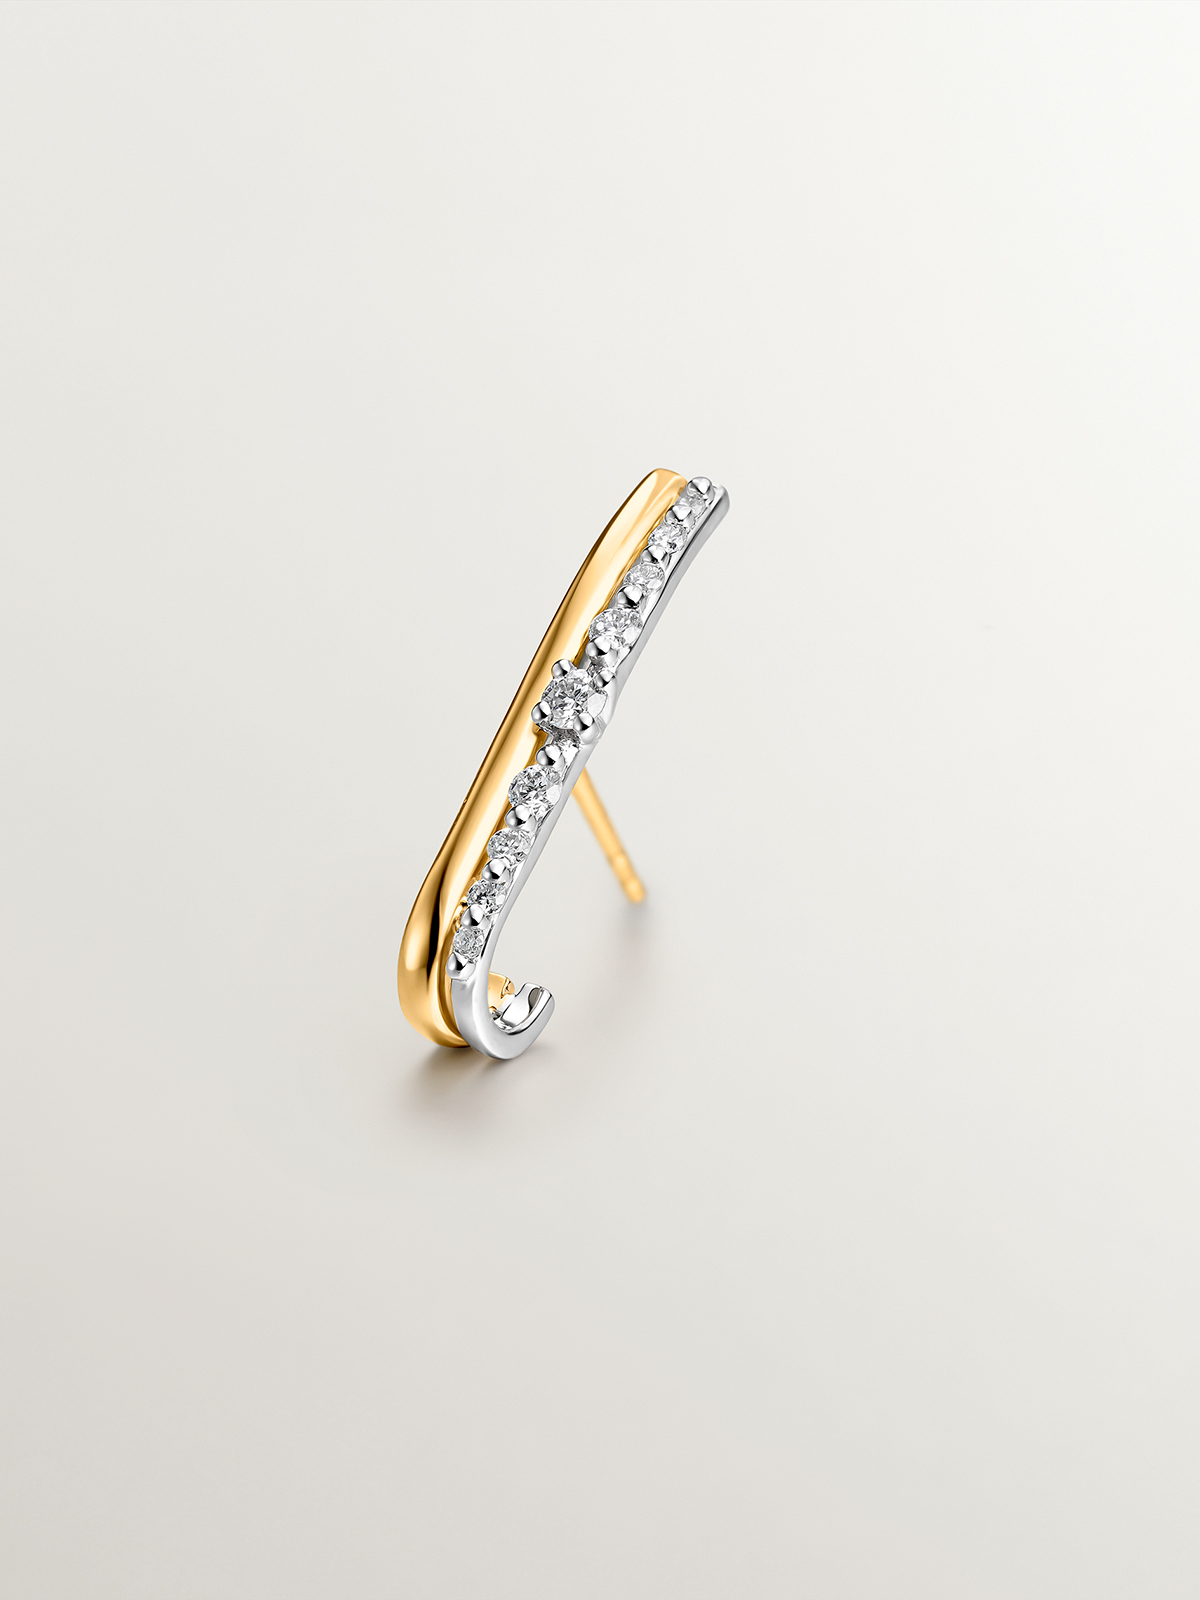 Right individual climber earring made of 18K yellow and white gold with diamonds.